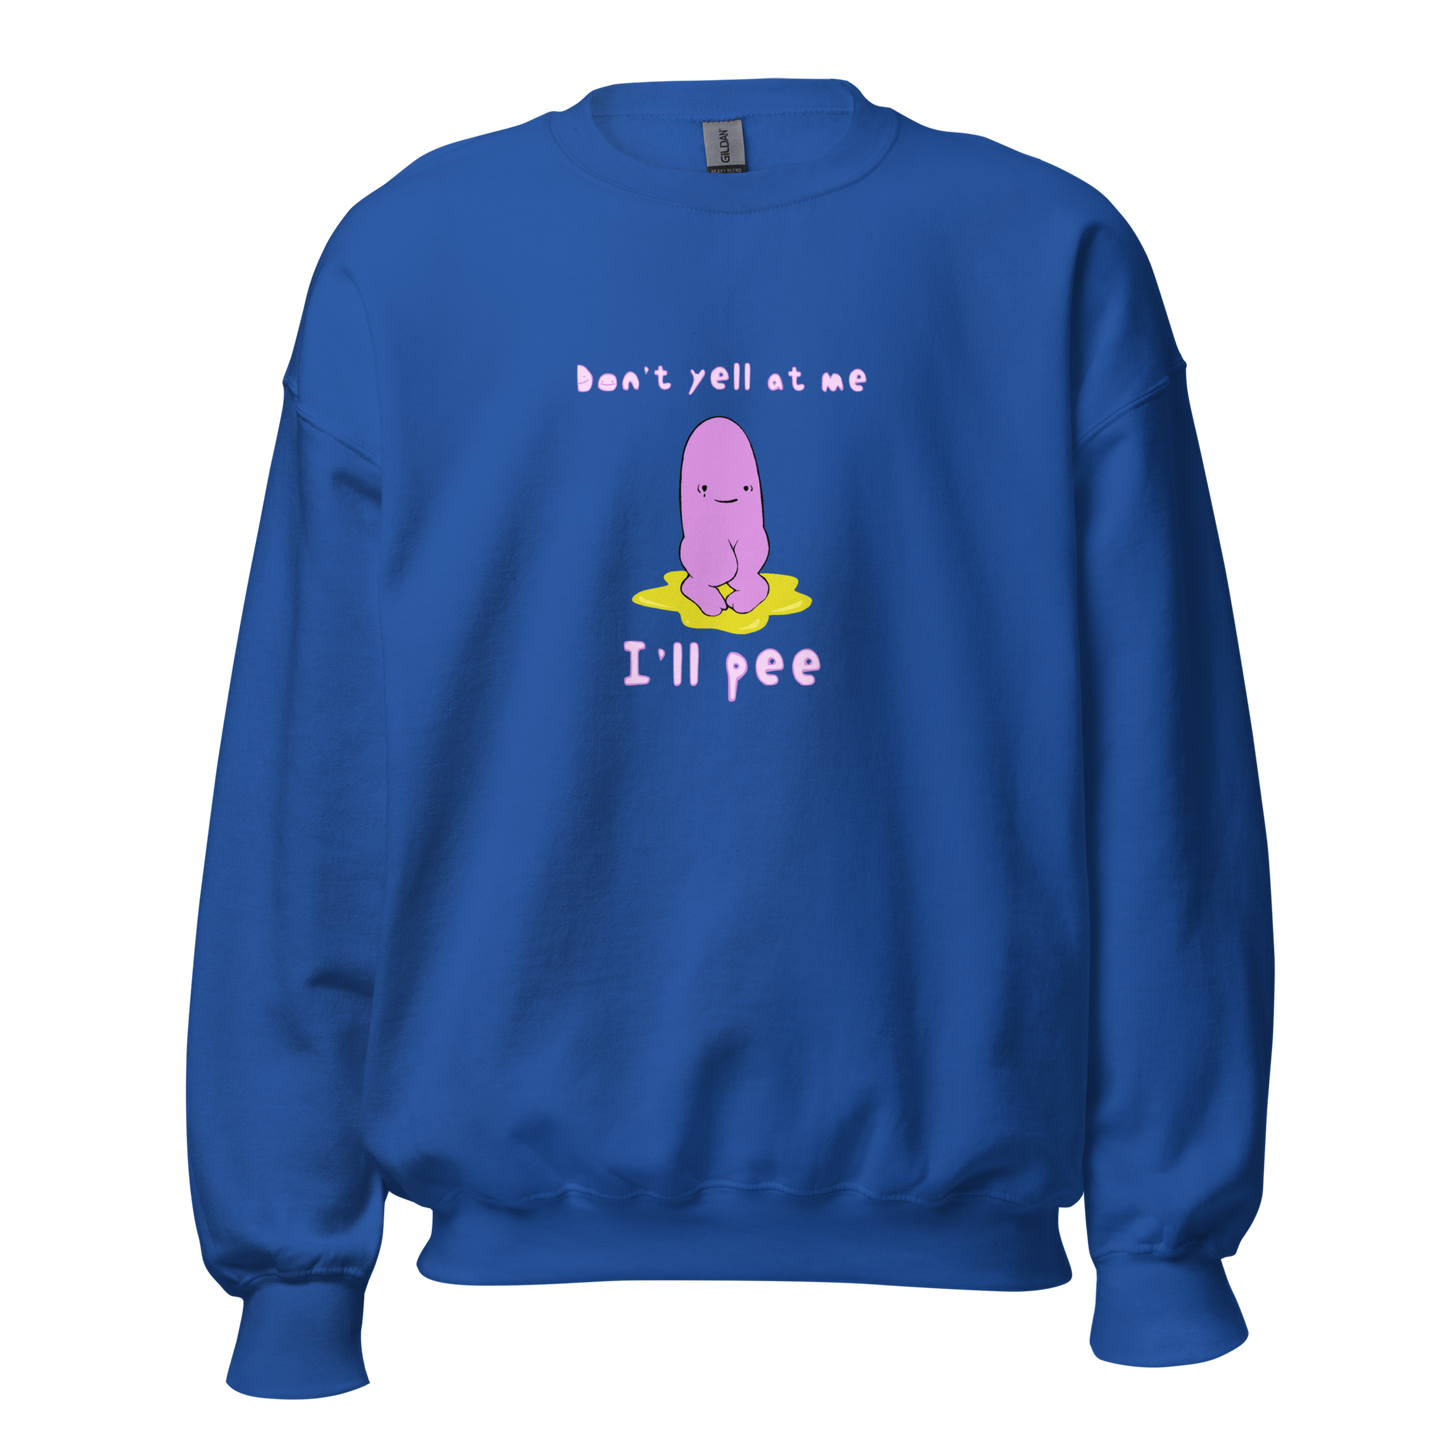 Don't Yell At Me Crew Neck